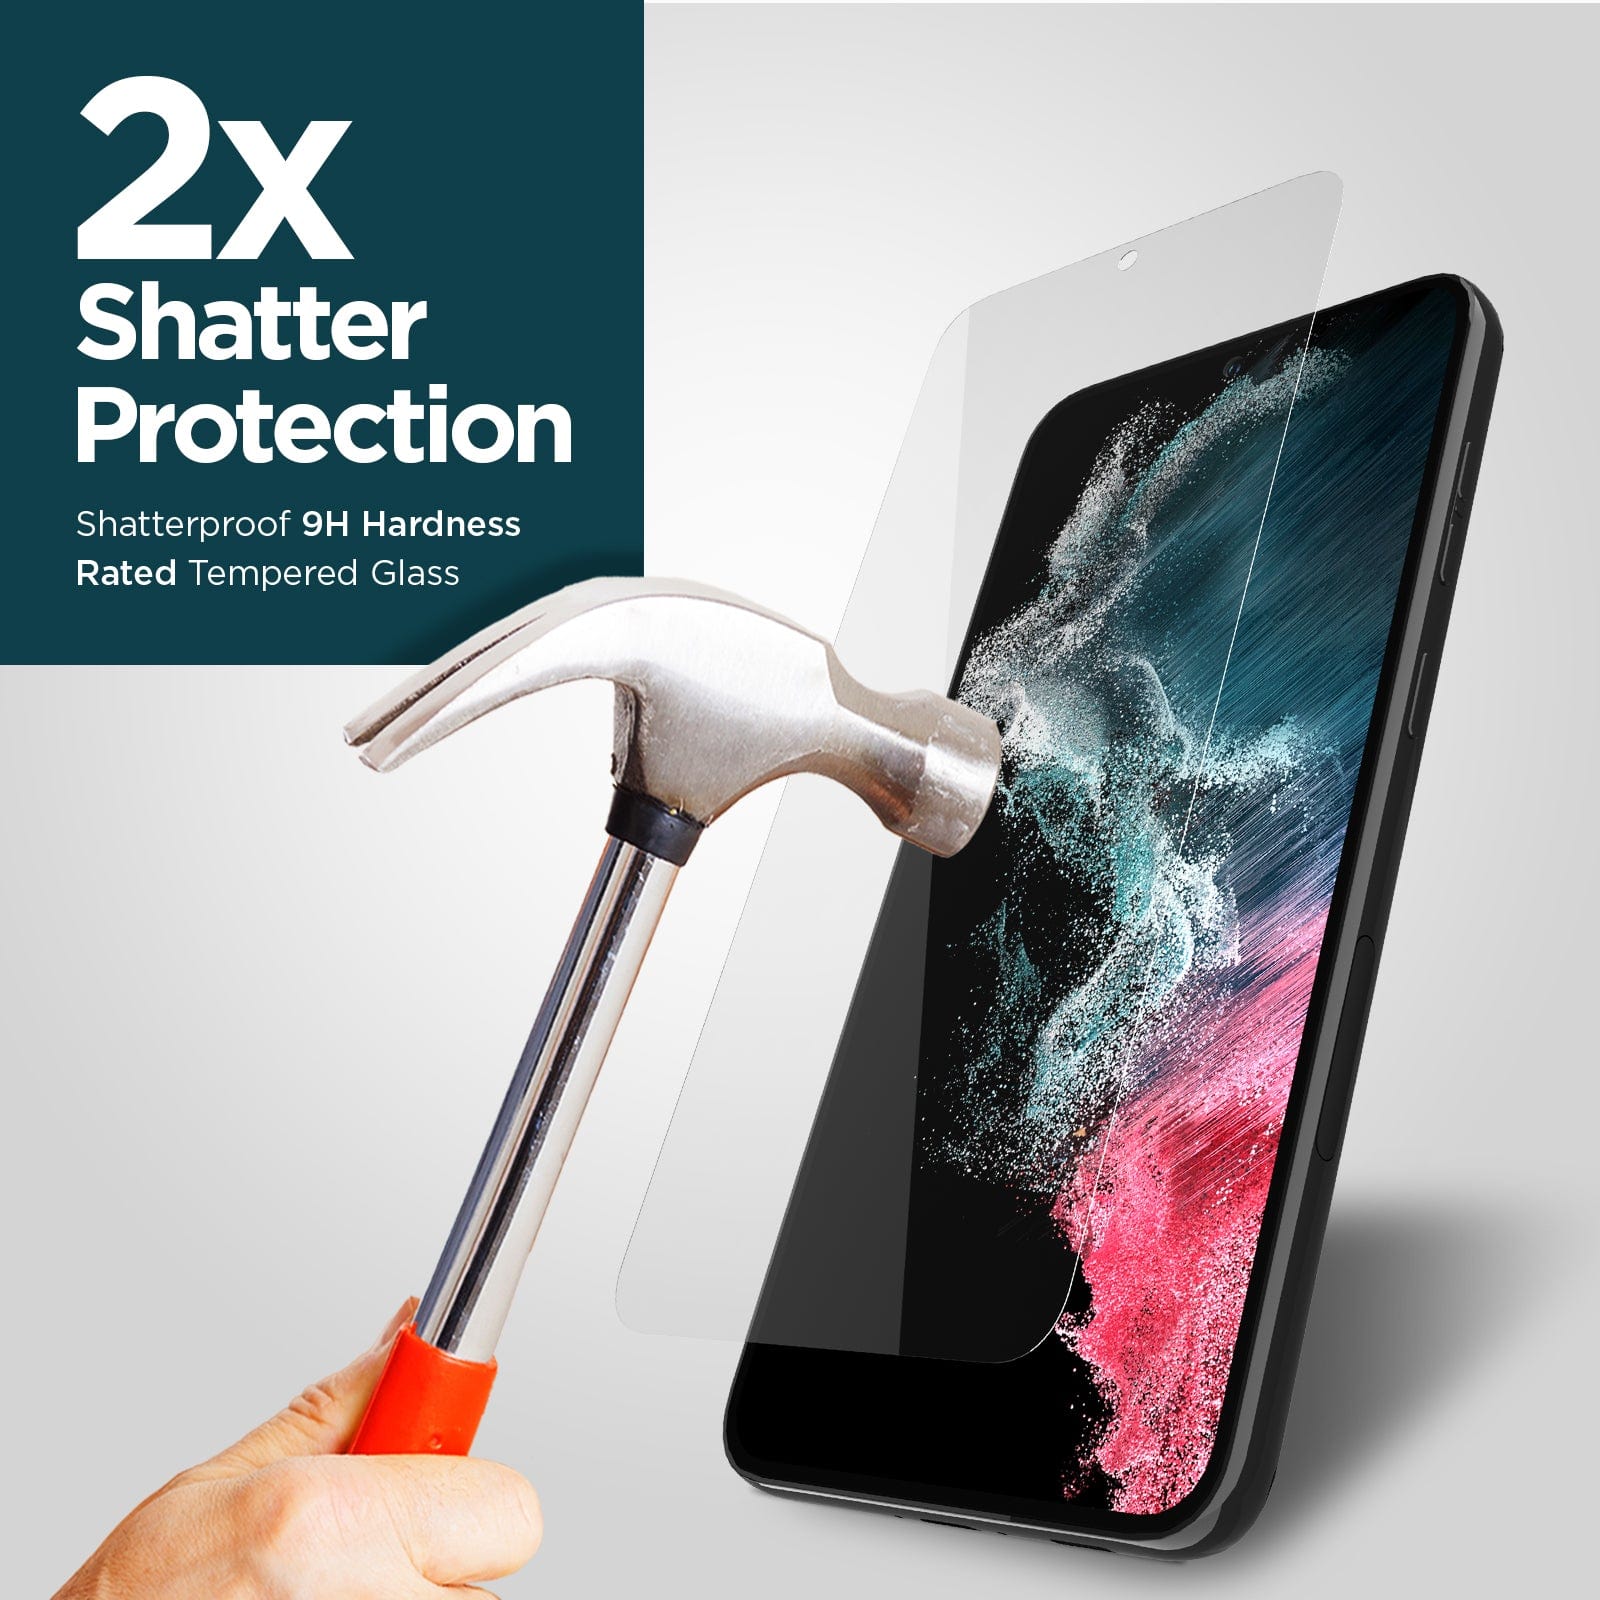 2x SHATTER PROTECTION. SHATTERPROOF 9H HARDNESS RATED TEMPERED GLASS.